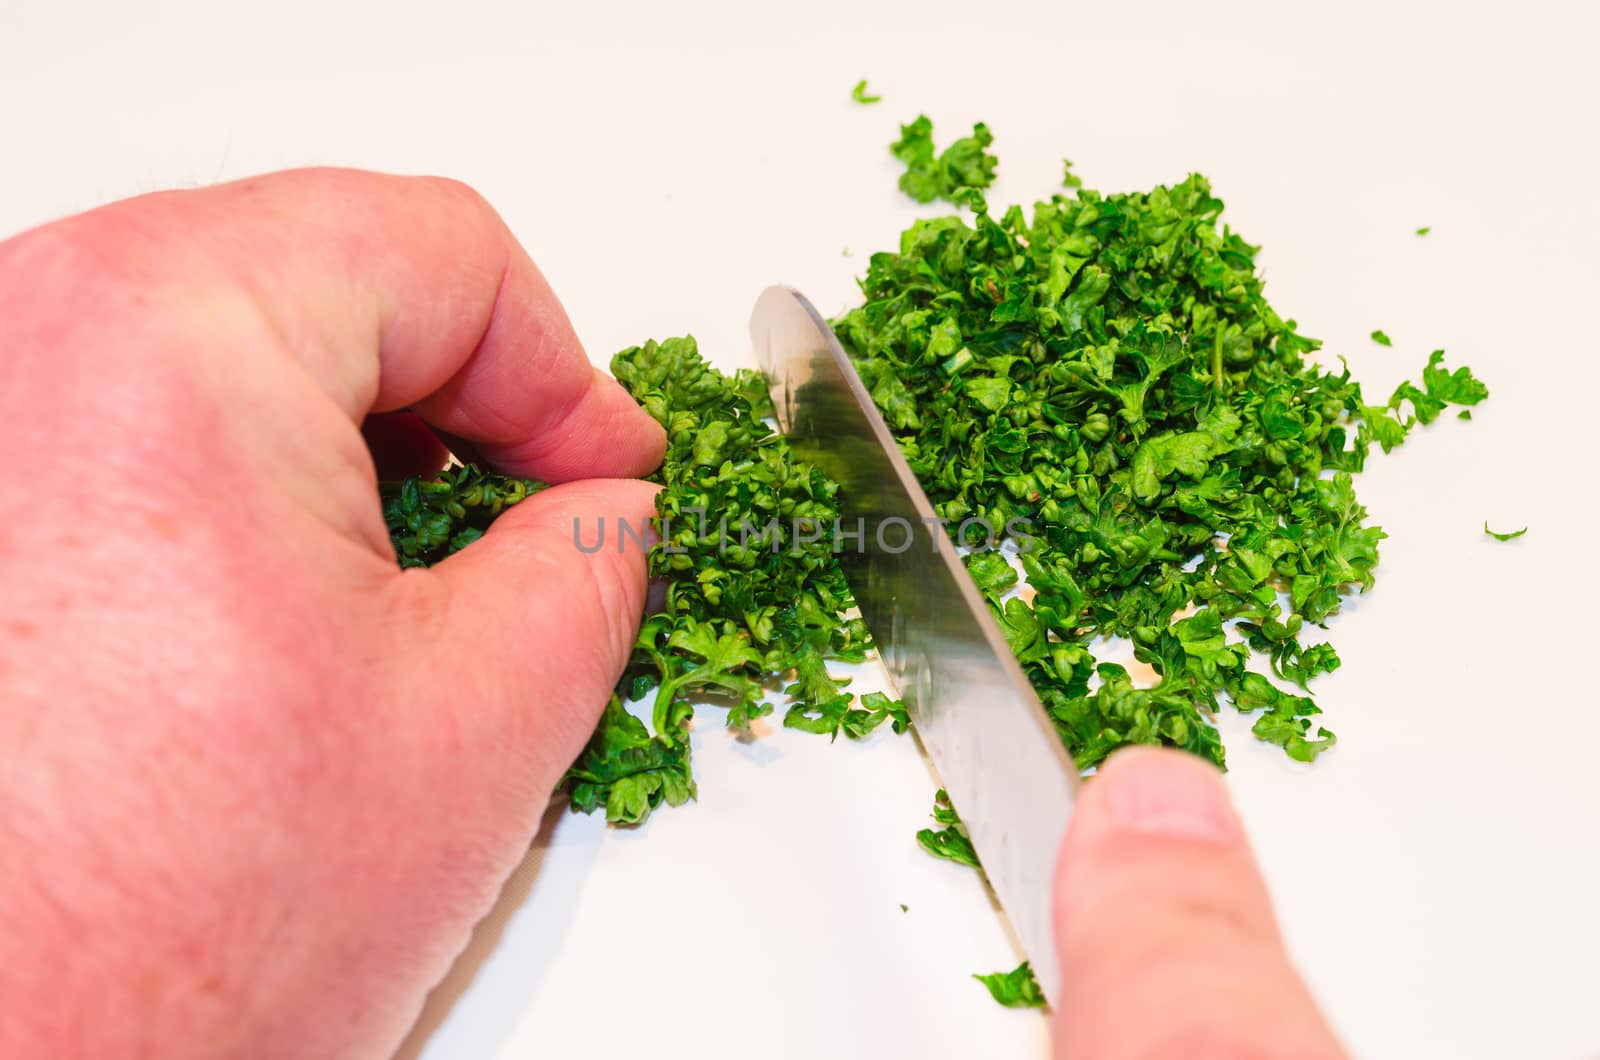 Chopping parsley by JFsPic